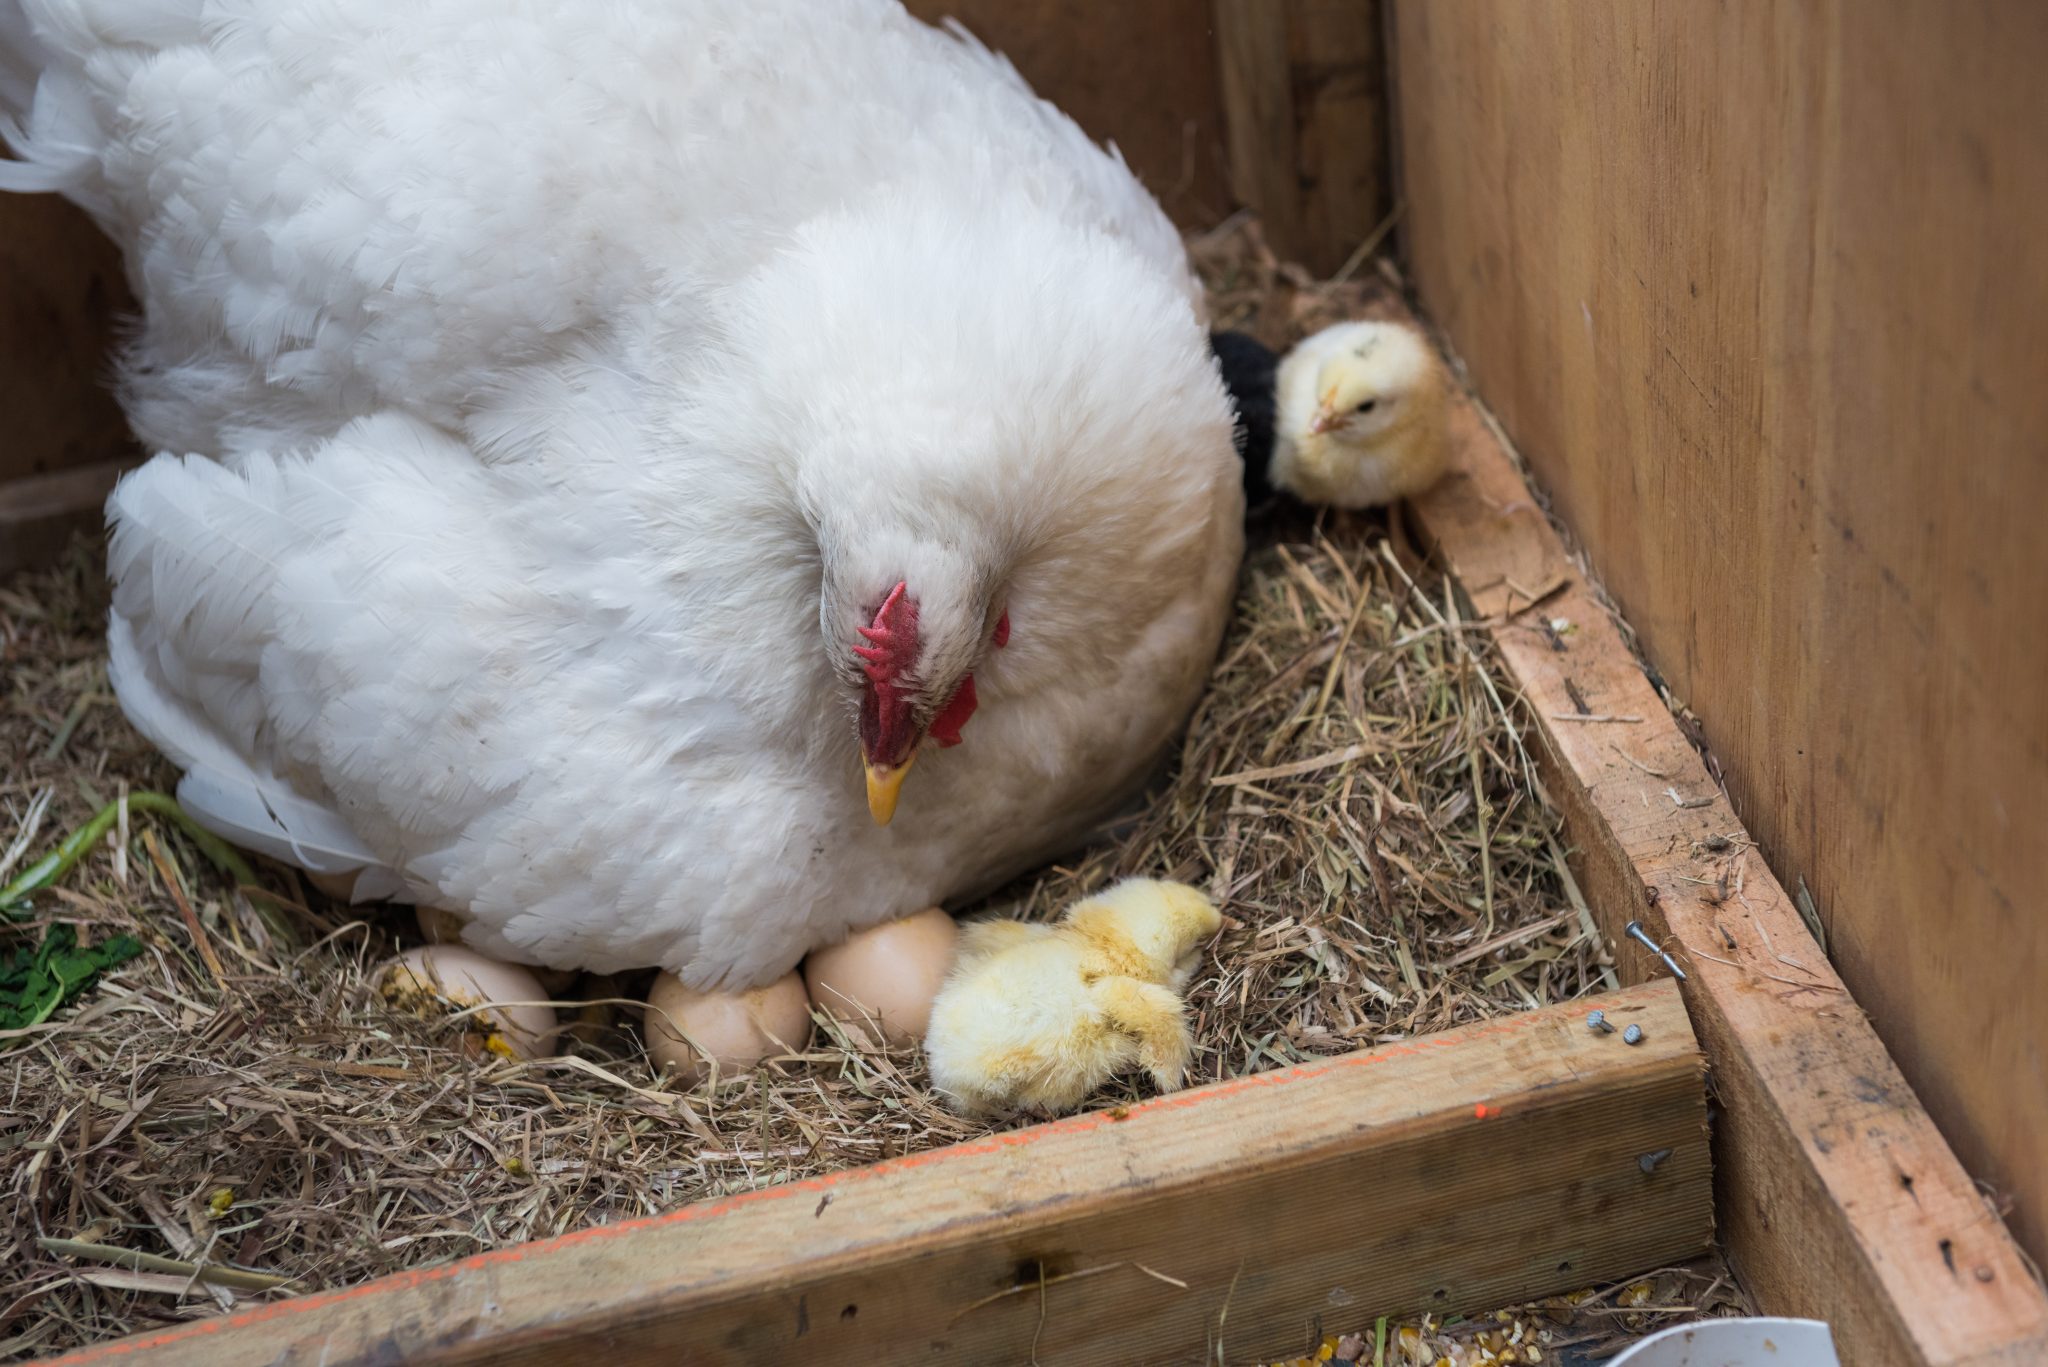 A white hen sitting in a nesting box with chicks beside her.